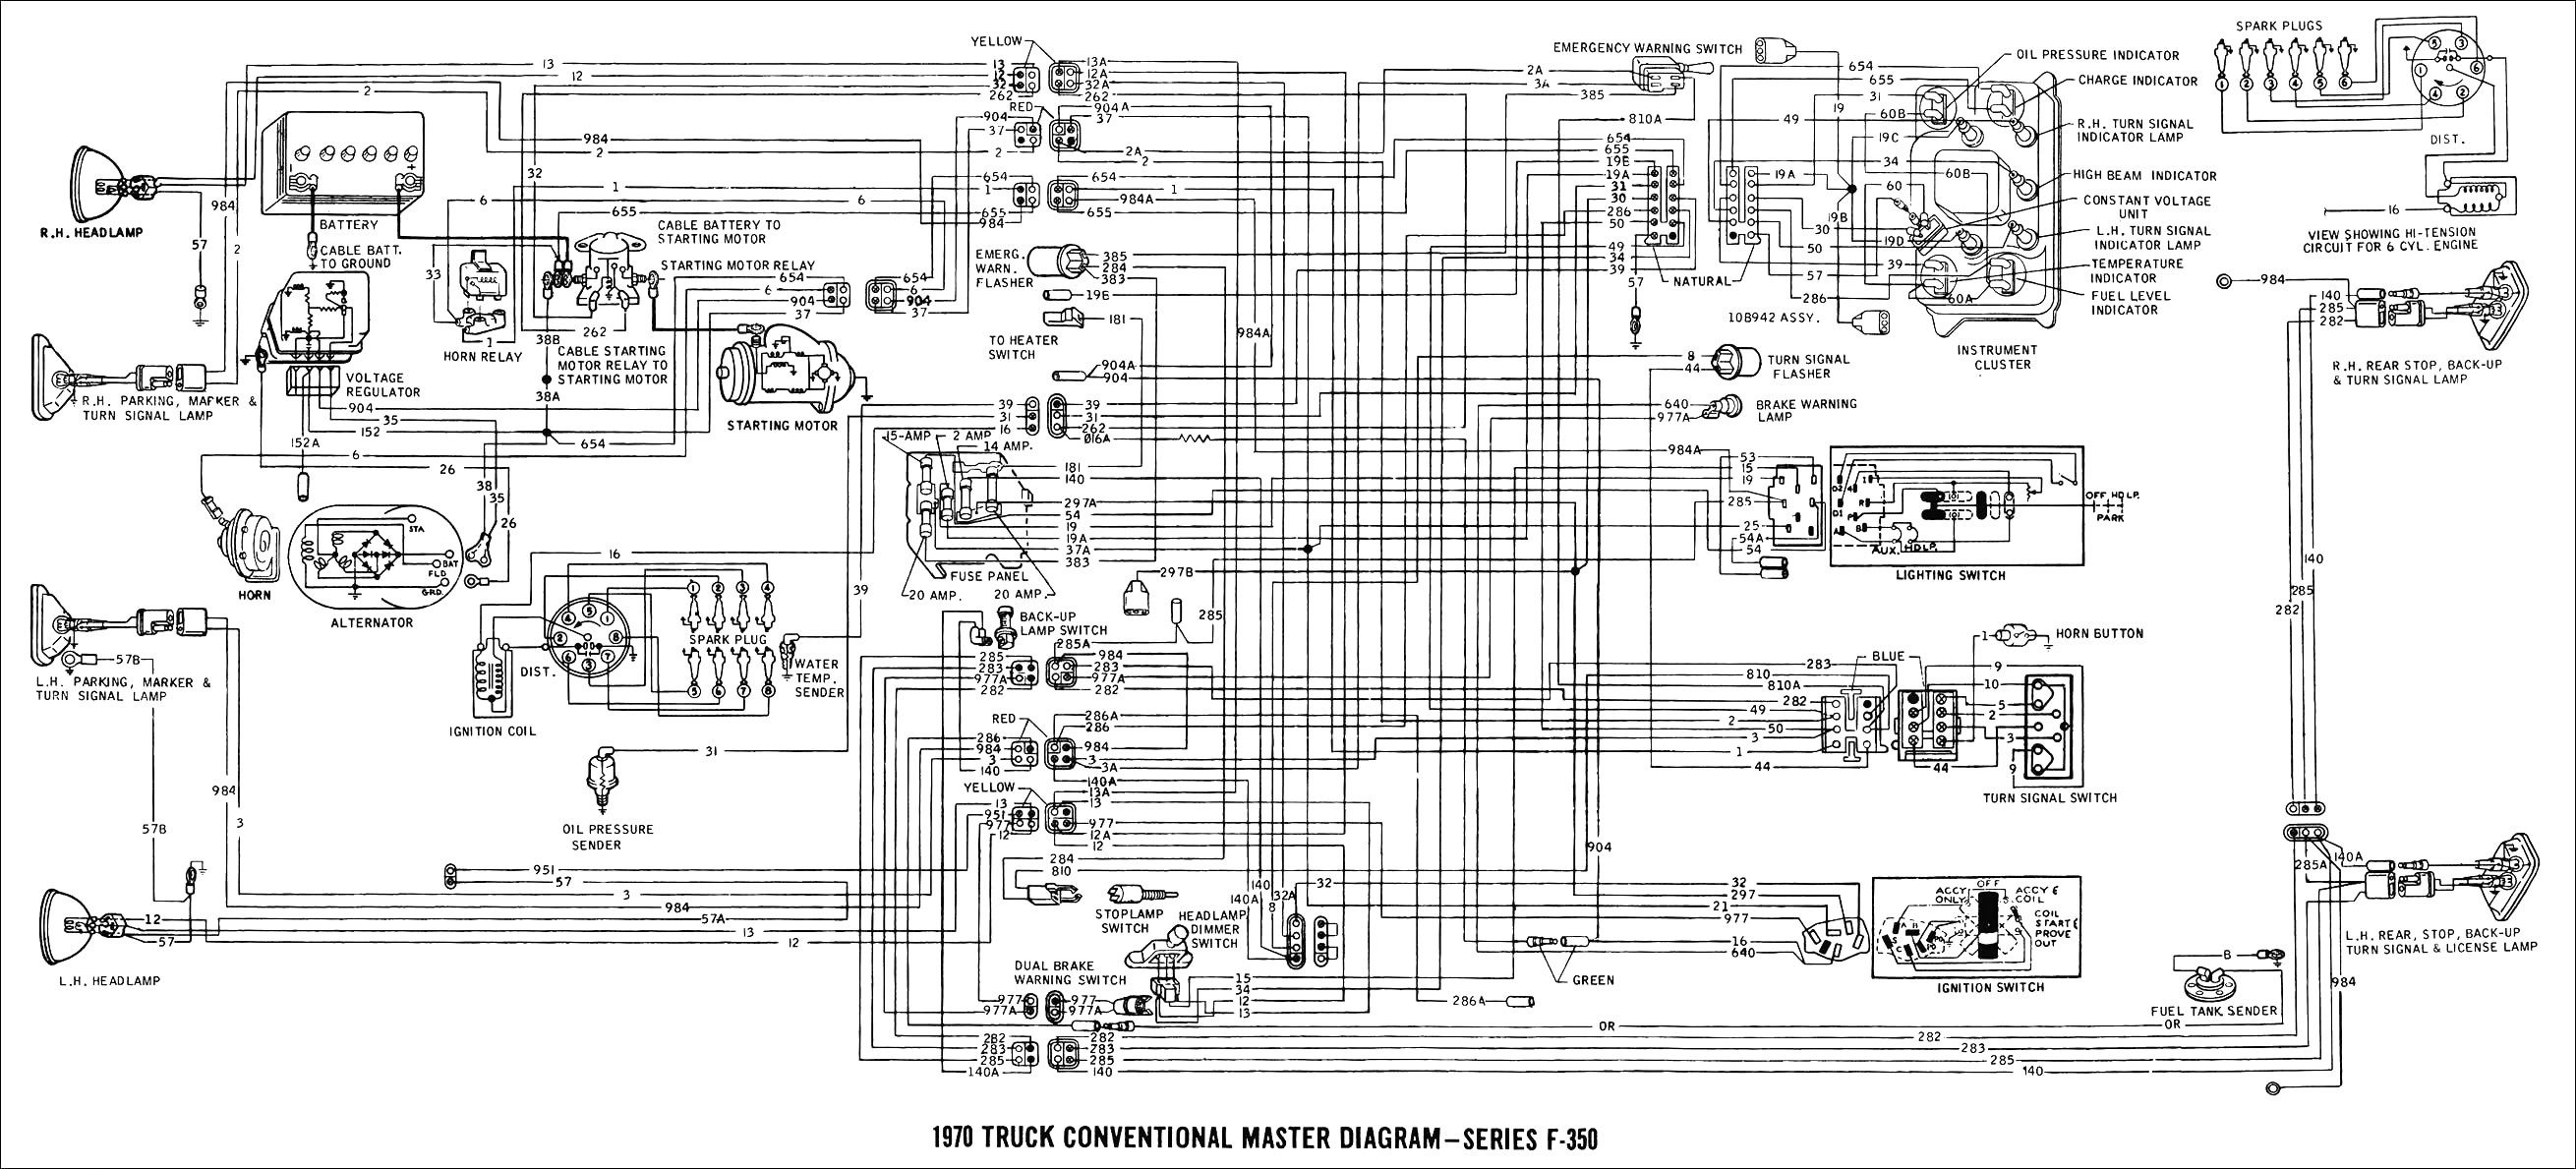 1996 Ford Ranger Wiring Diagram To 2012 03 23 96 4 0 Simple F250 Trailer